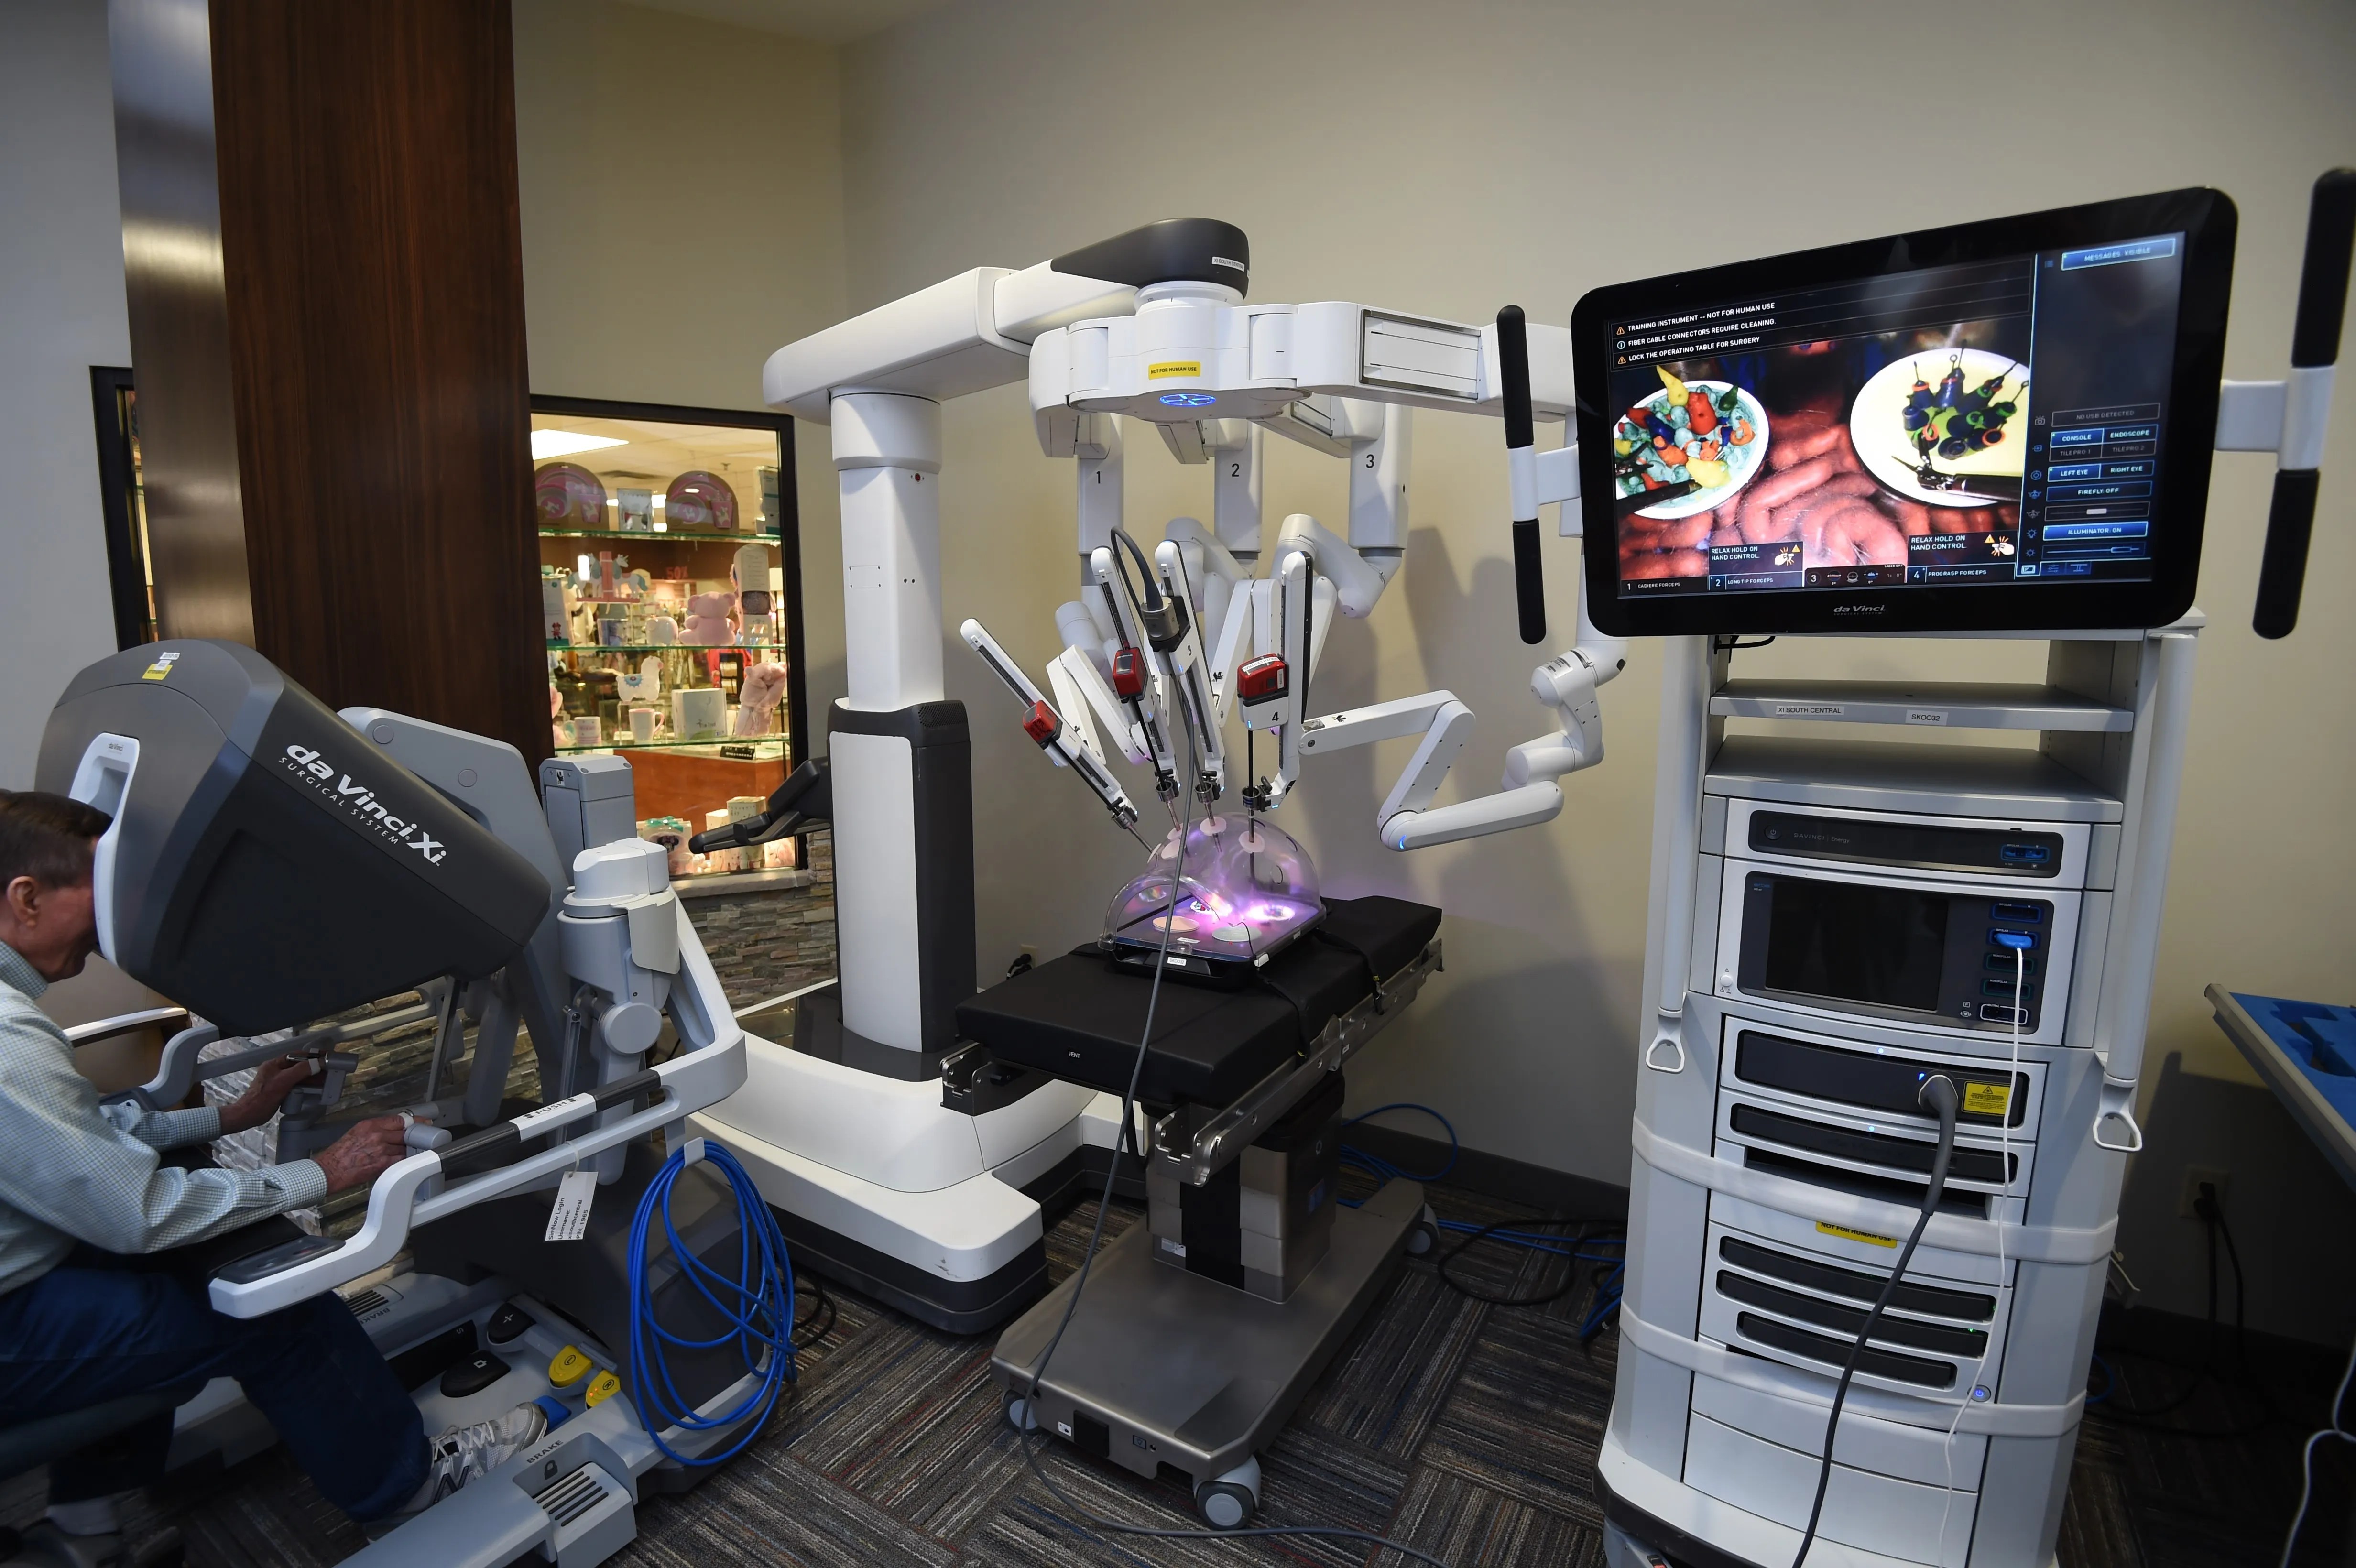 A visitor tries to operate the da Vinci Xi surgical system on display at Baxter Regional Medical Center on Tuesday afternoon. The hospital recently purchased a da Vinci Xi system identical to the one displayed. The da Vinci systems are called "medical robots," but they are not autonomous and require a human to control it.